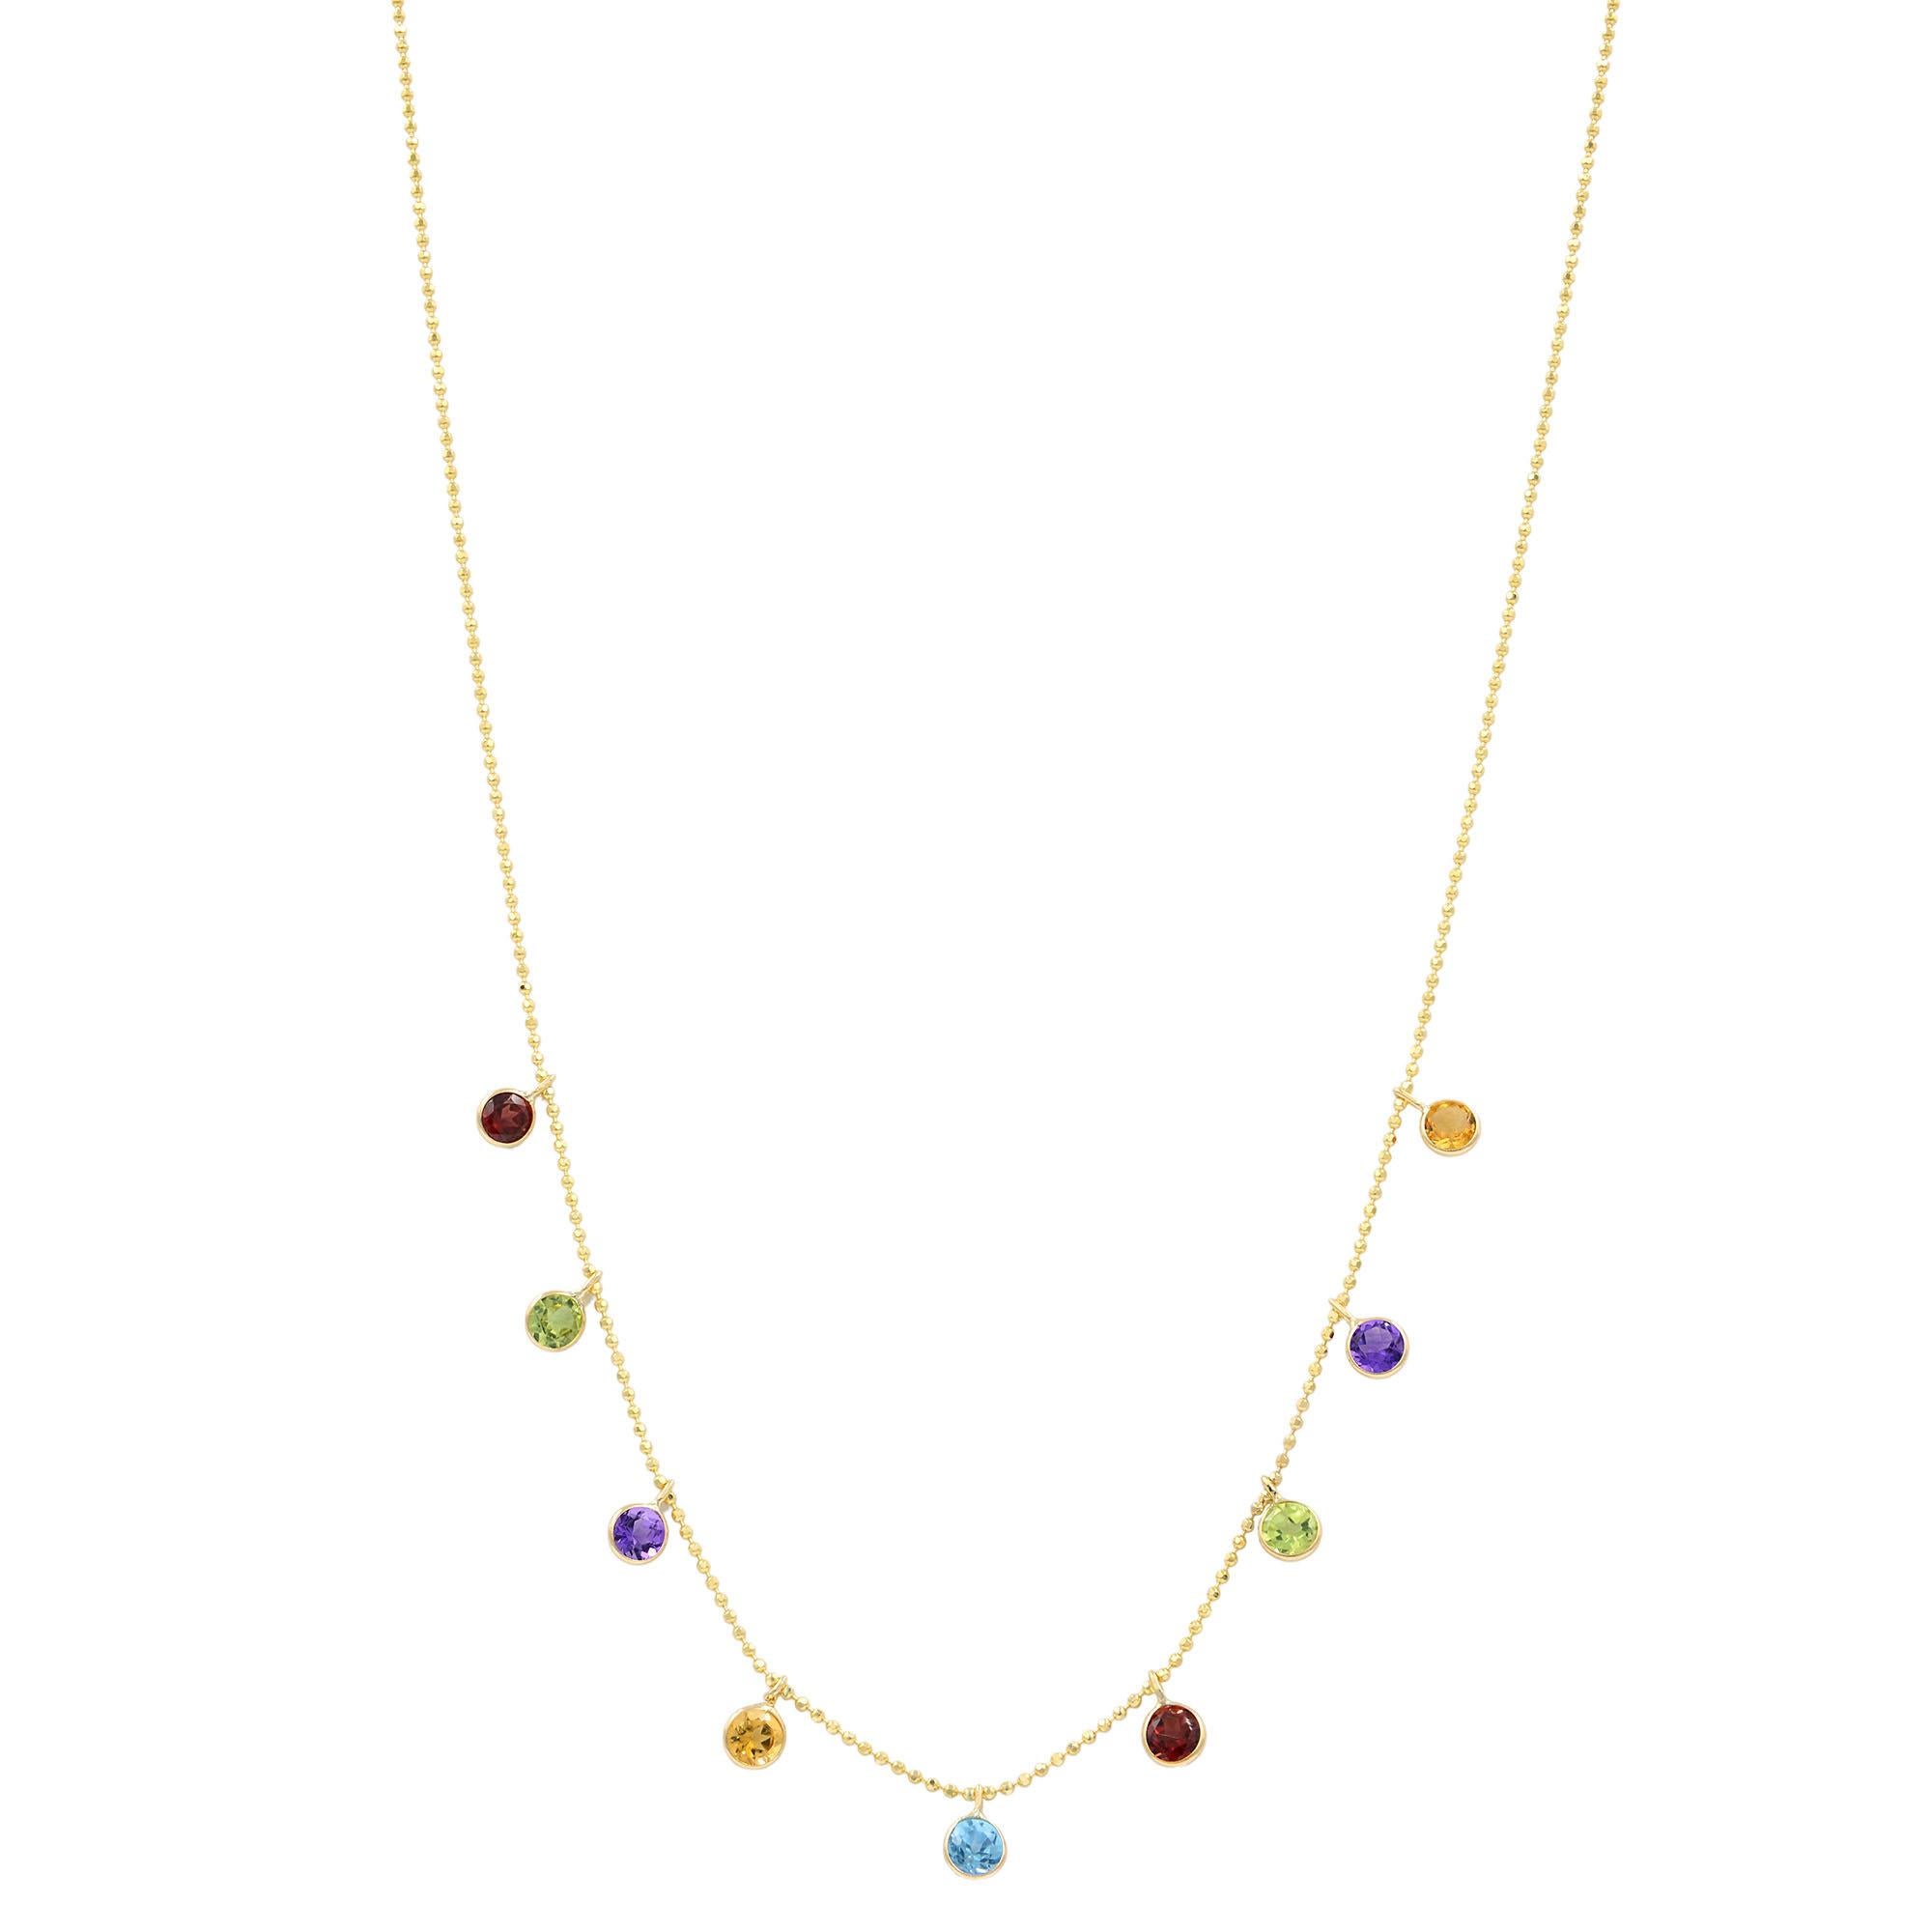 Delicate and oh so trendy, gemstone by the yard chain necklace. Crafted in 14K yellow gold, this necklace features 9 bezel set multicolor gemstones. Chain length: 18 inches. It's stackable and easy everyday wear. Comes with a presentable gift box. 